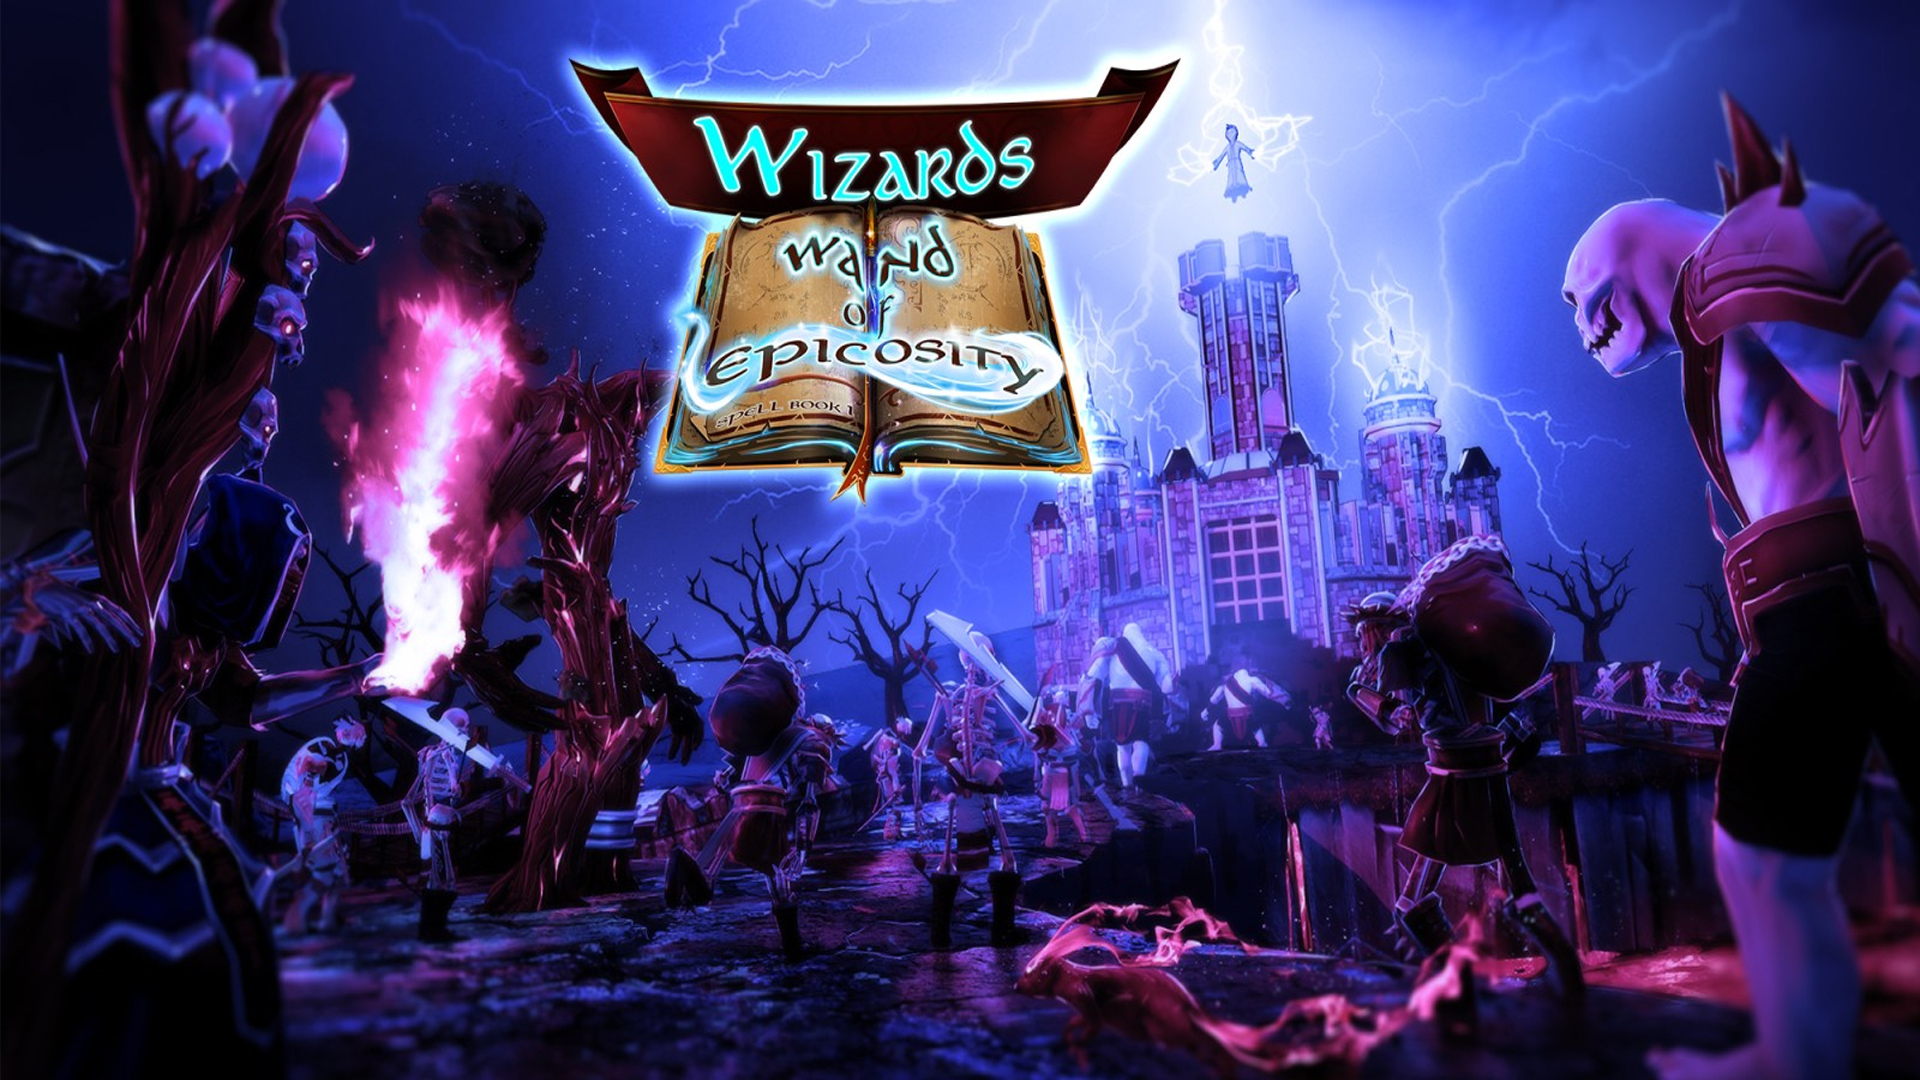 download the last version for iphoneWizards: Wand of Epicosity